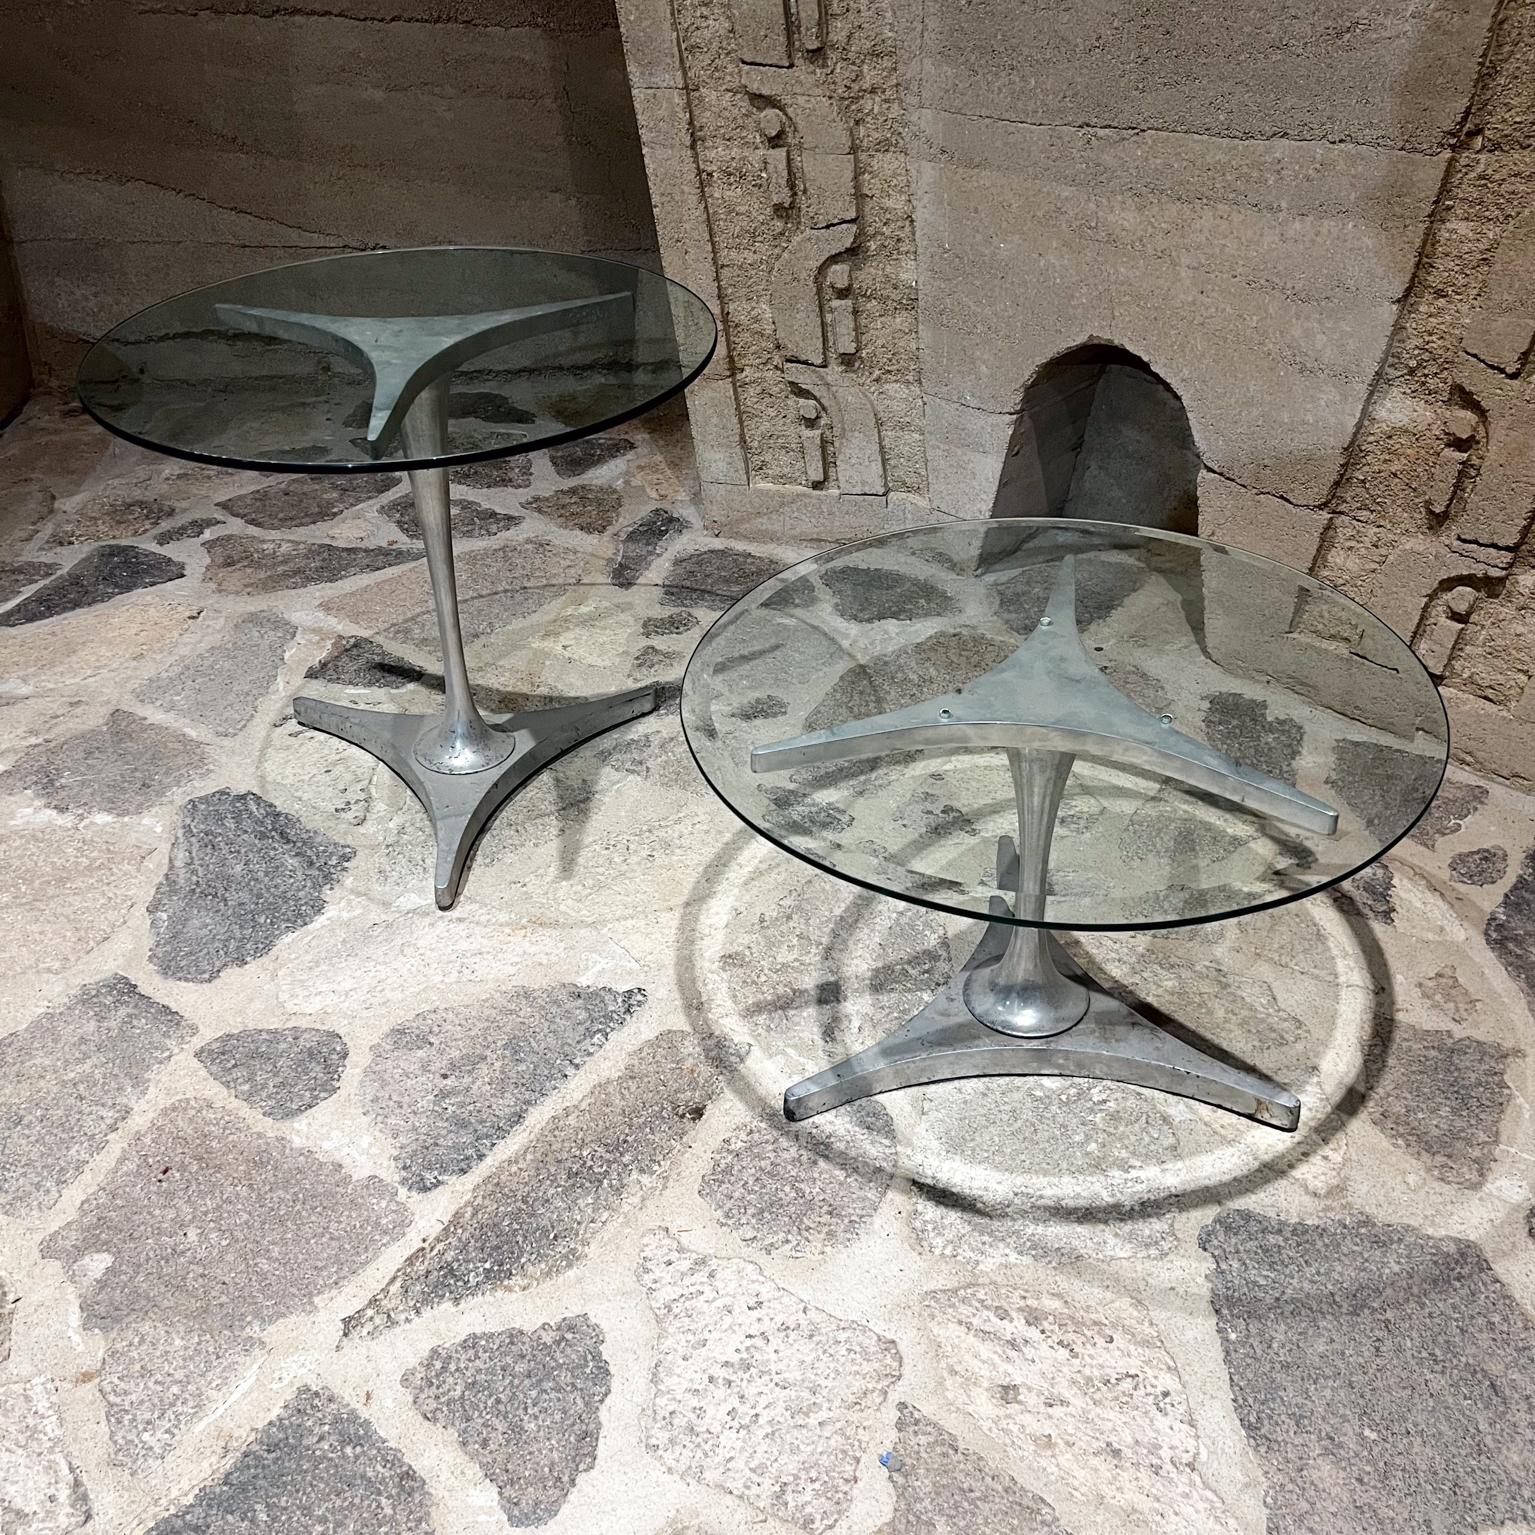 Mid Century Modern Set of Aluminum Nesting Side Tables, set of two. 
Taller 21 x 17 base Smaller 14.5 tall x 17 diameter
Modern tripod base.
Original Unrestored preowned fair condition.
Aluminum with weather exposure shows signs of pitting.
Please